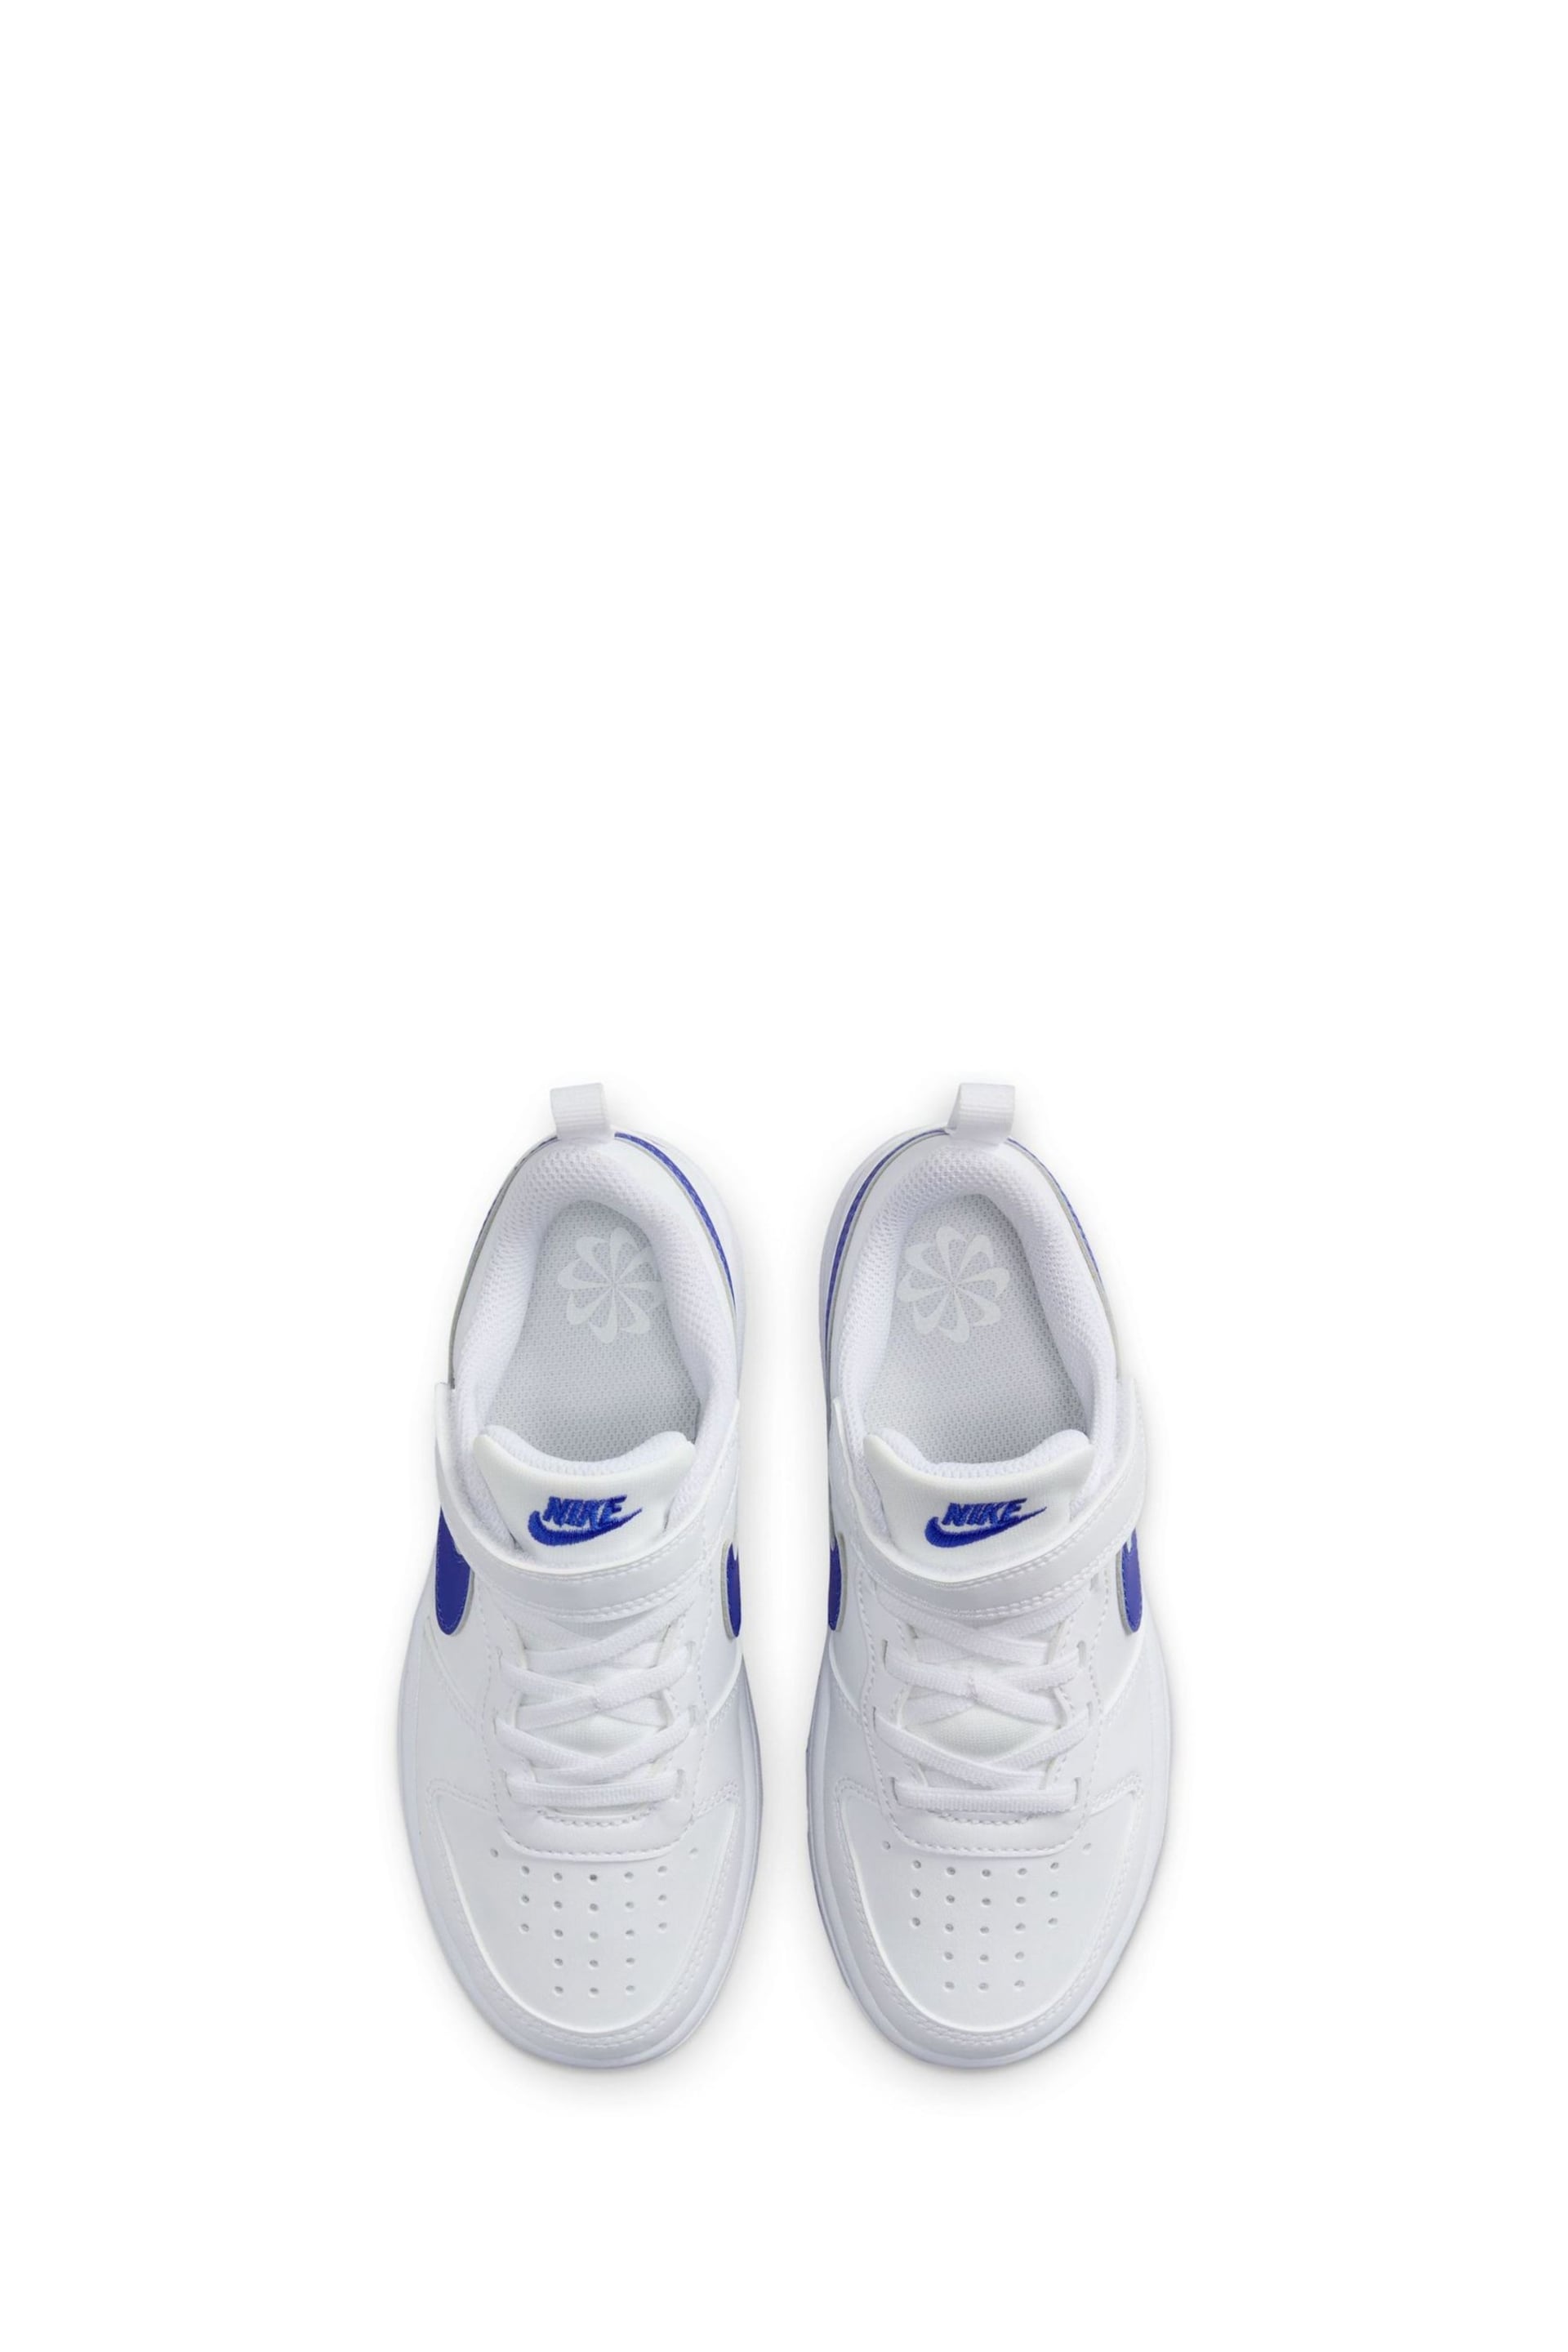 Nike White/Blue Junior Court Borough Low Recraft Trainers - Image 8 of 12